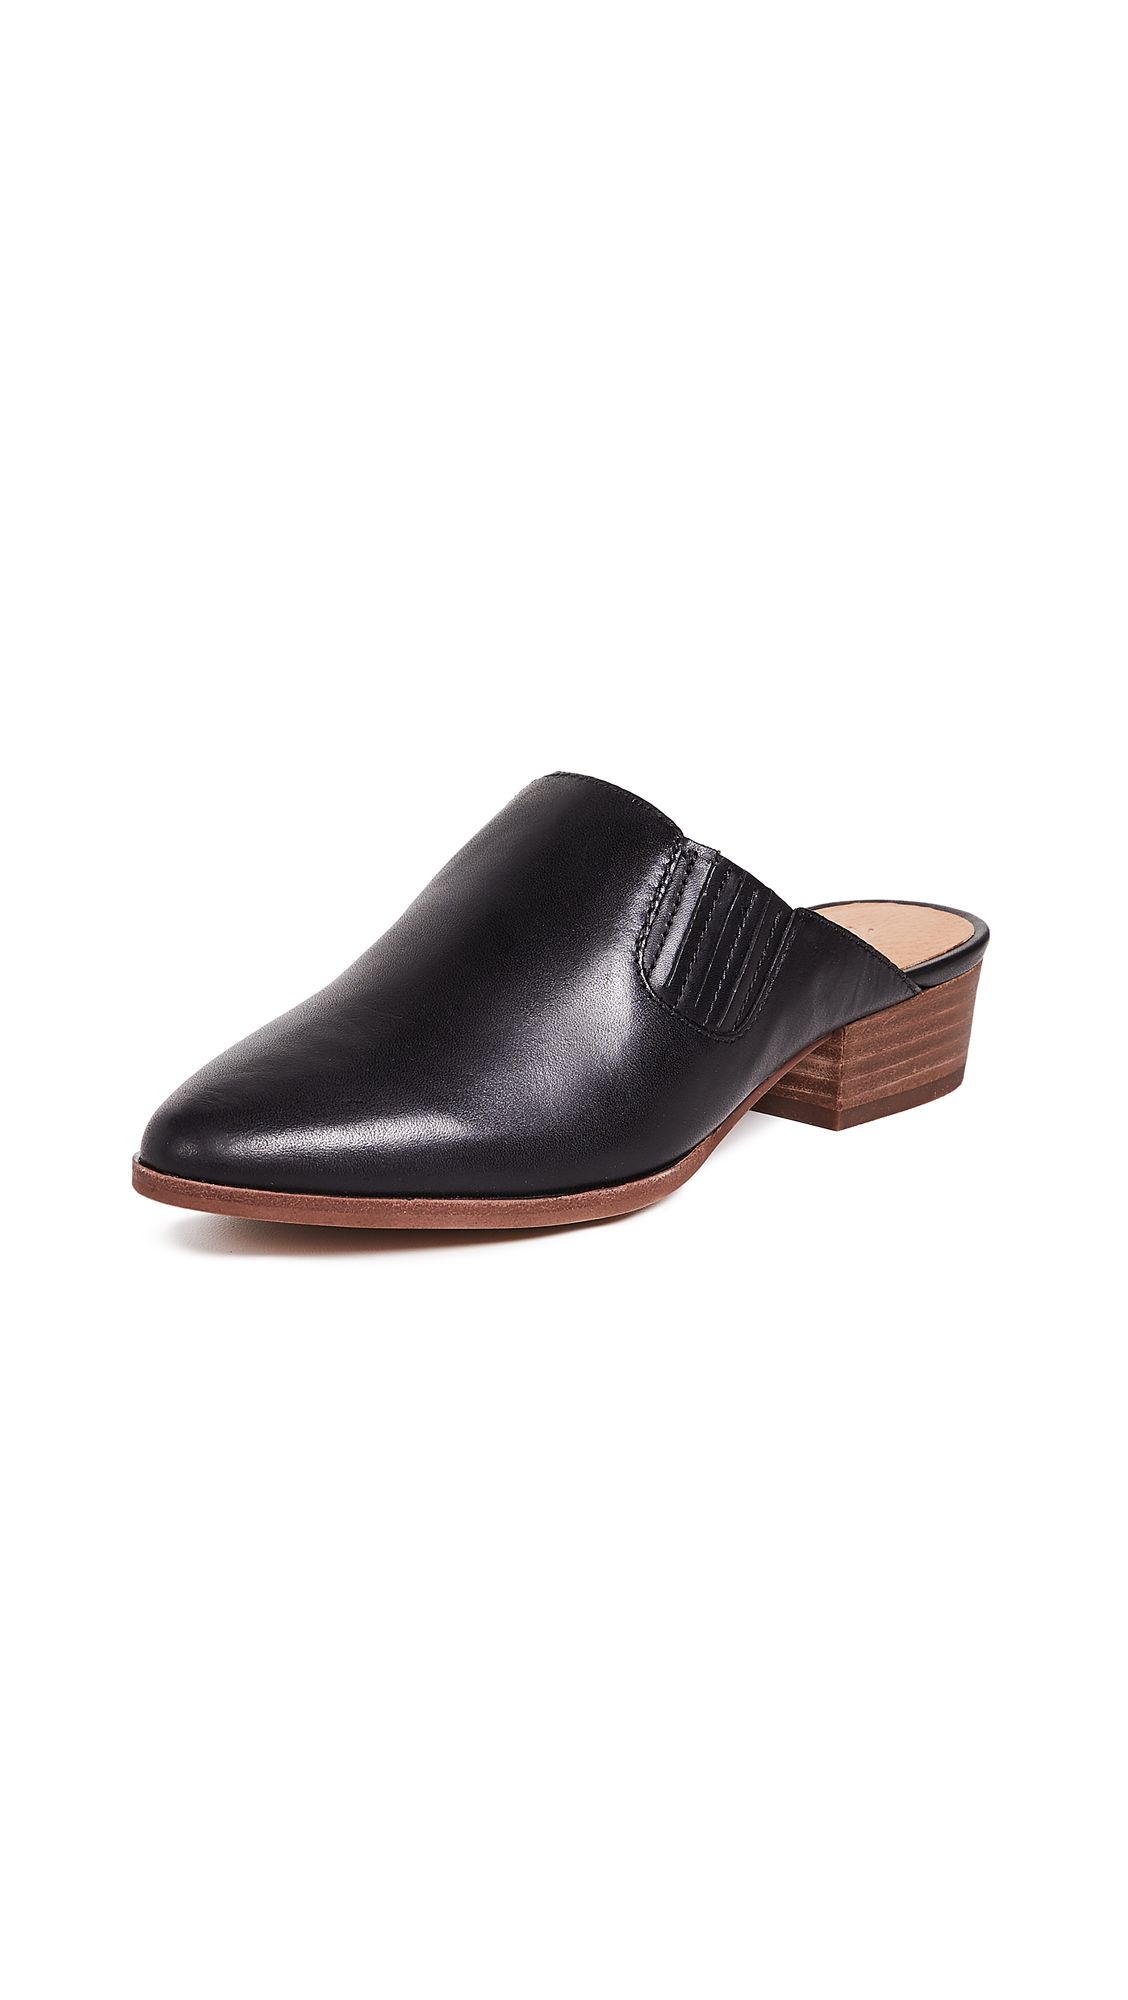 Madewell The Lanna Mules | Shopbop